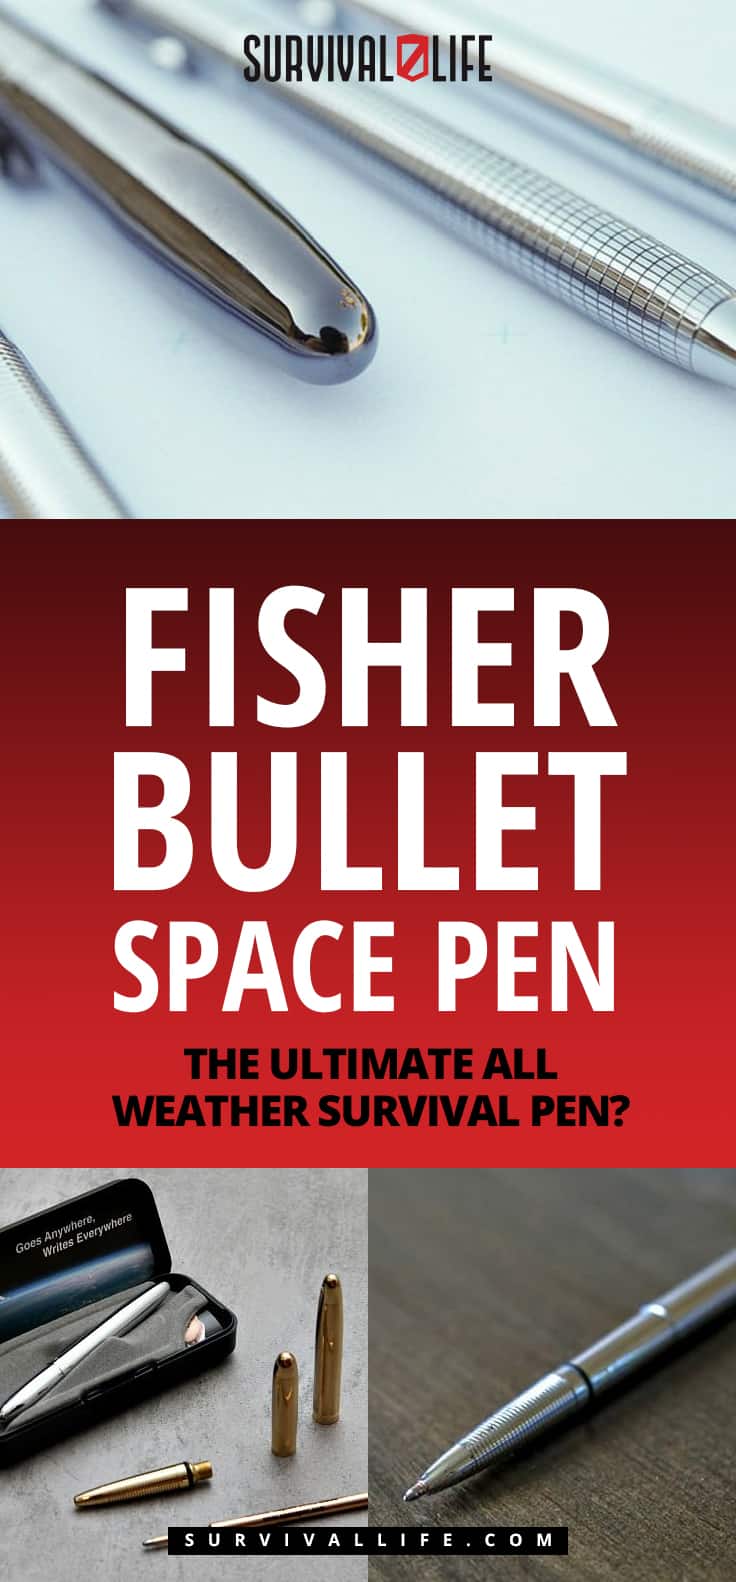 [Review] Fisher Bullet Space Pen- The Ultimate All Weather Survival Pen?